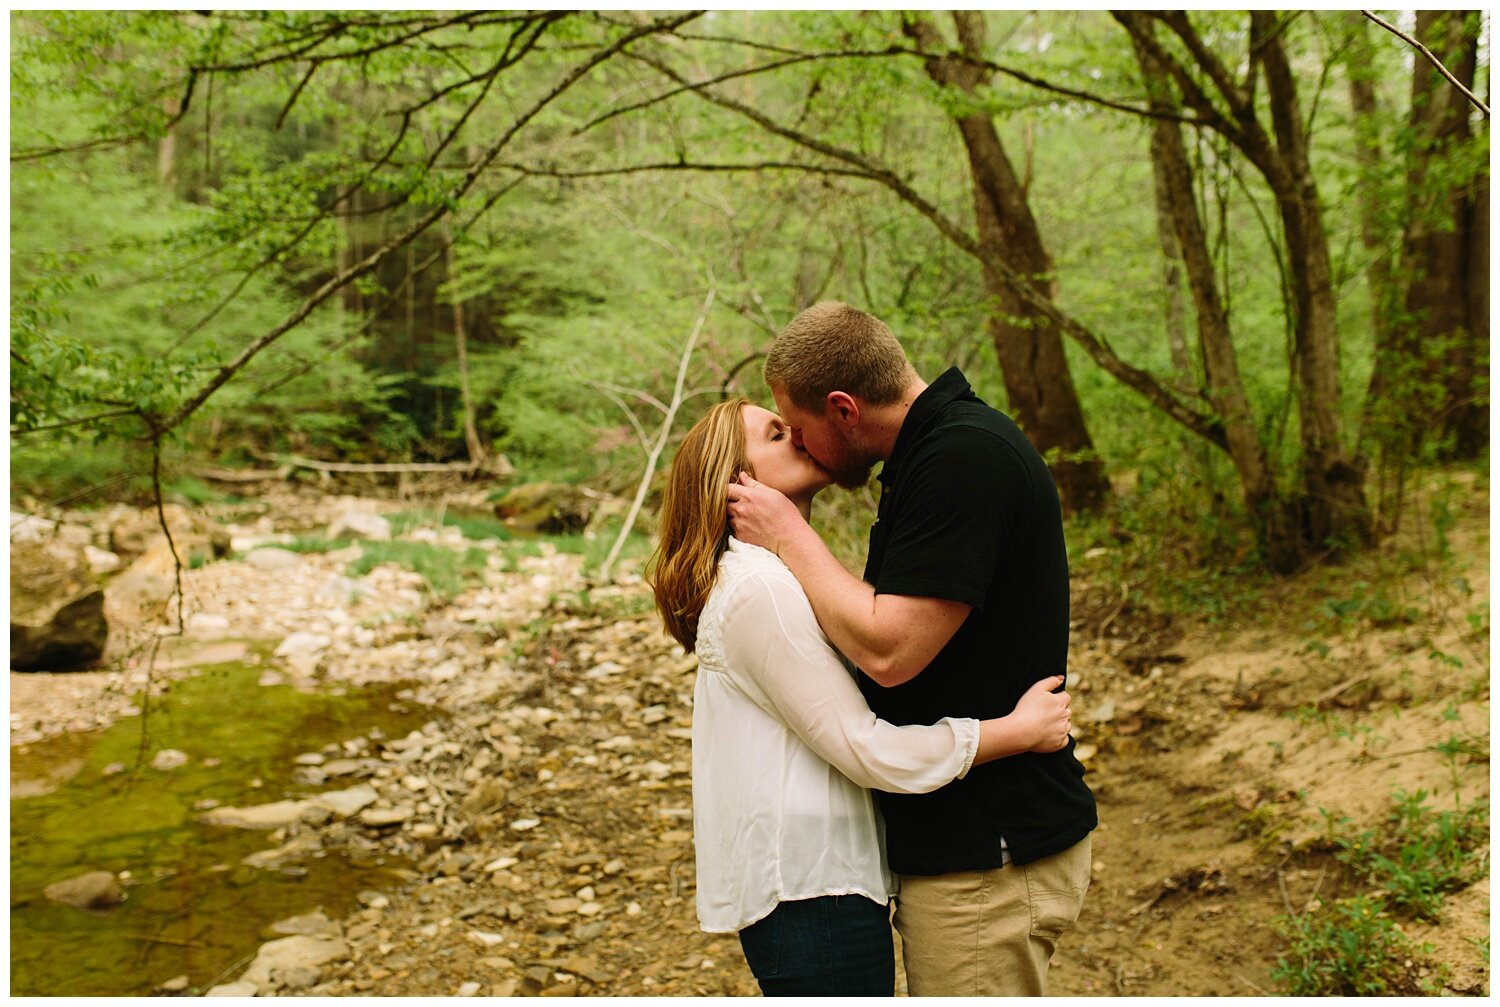 Kendra_Farris_Photography_Red_River_Gorge_Engagement_Photos-34.jpg